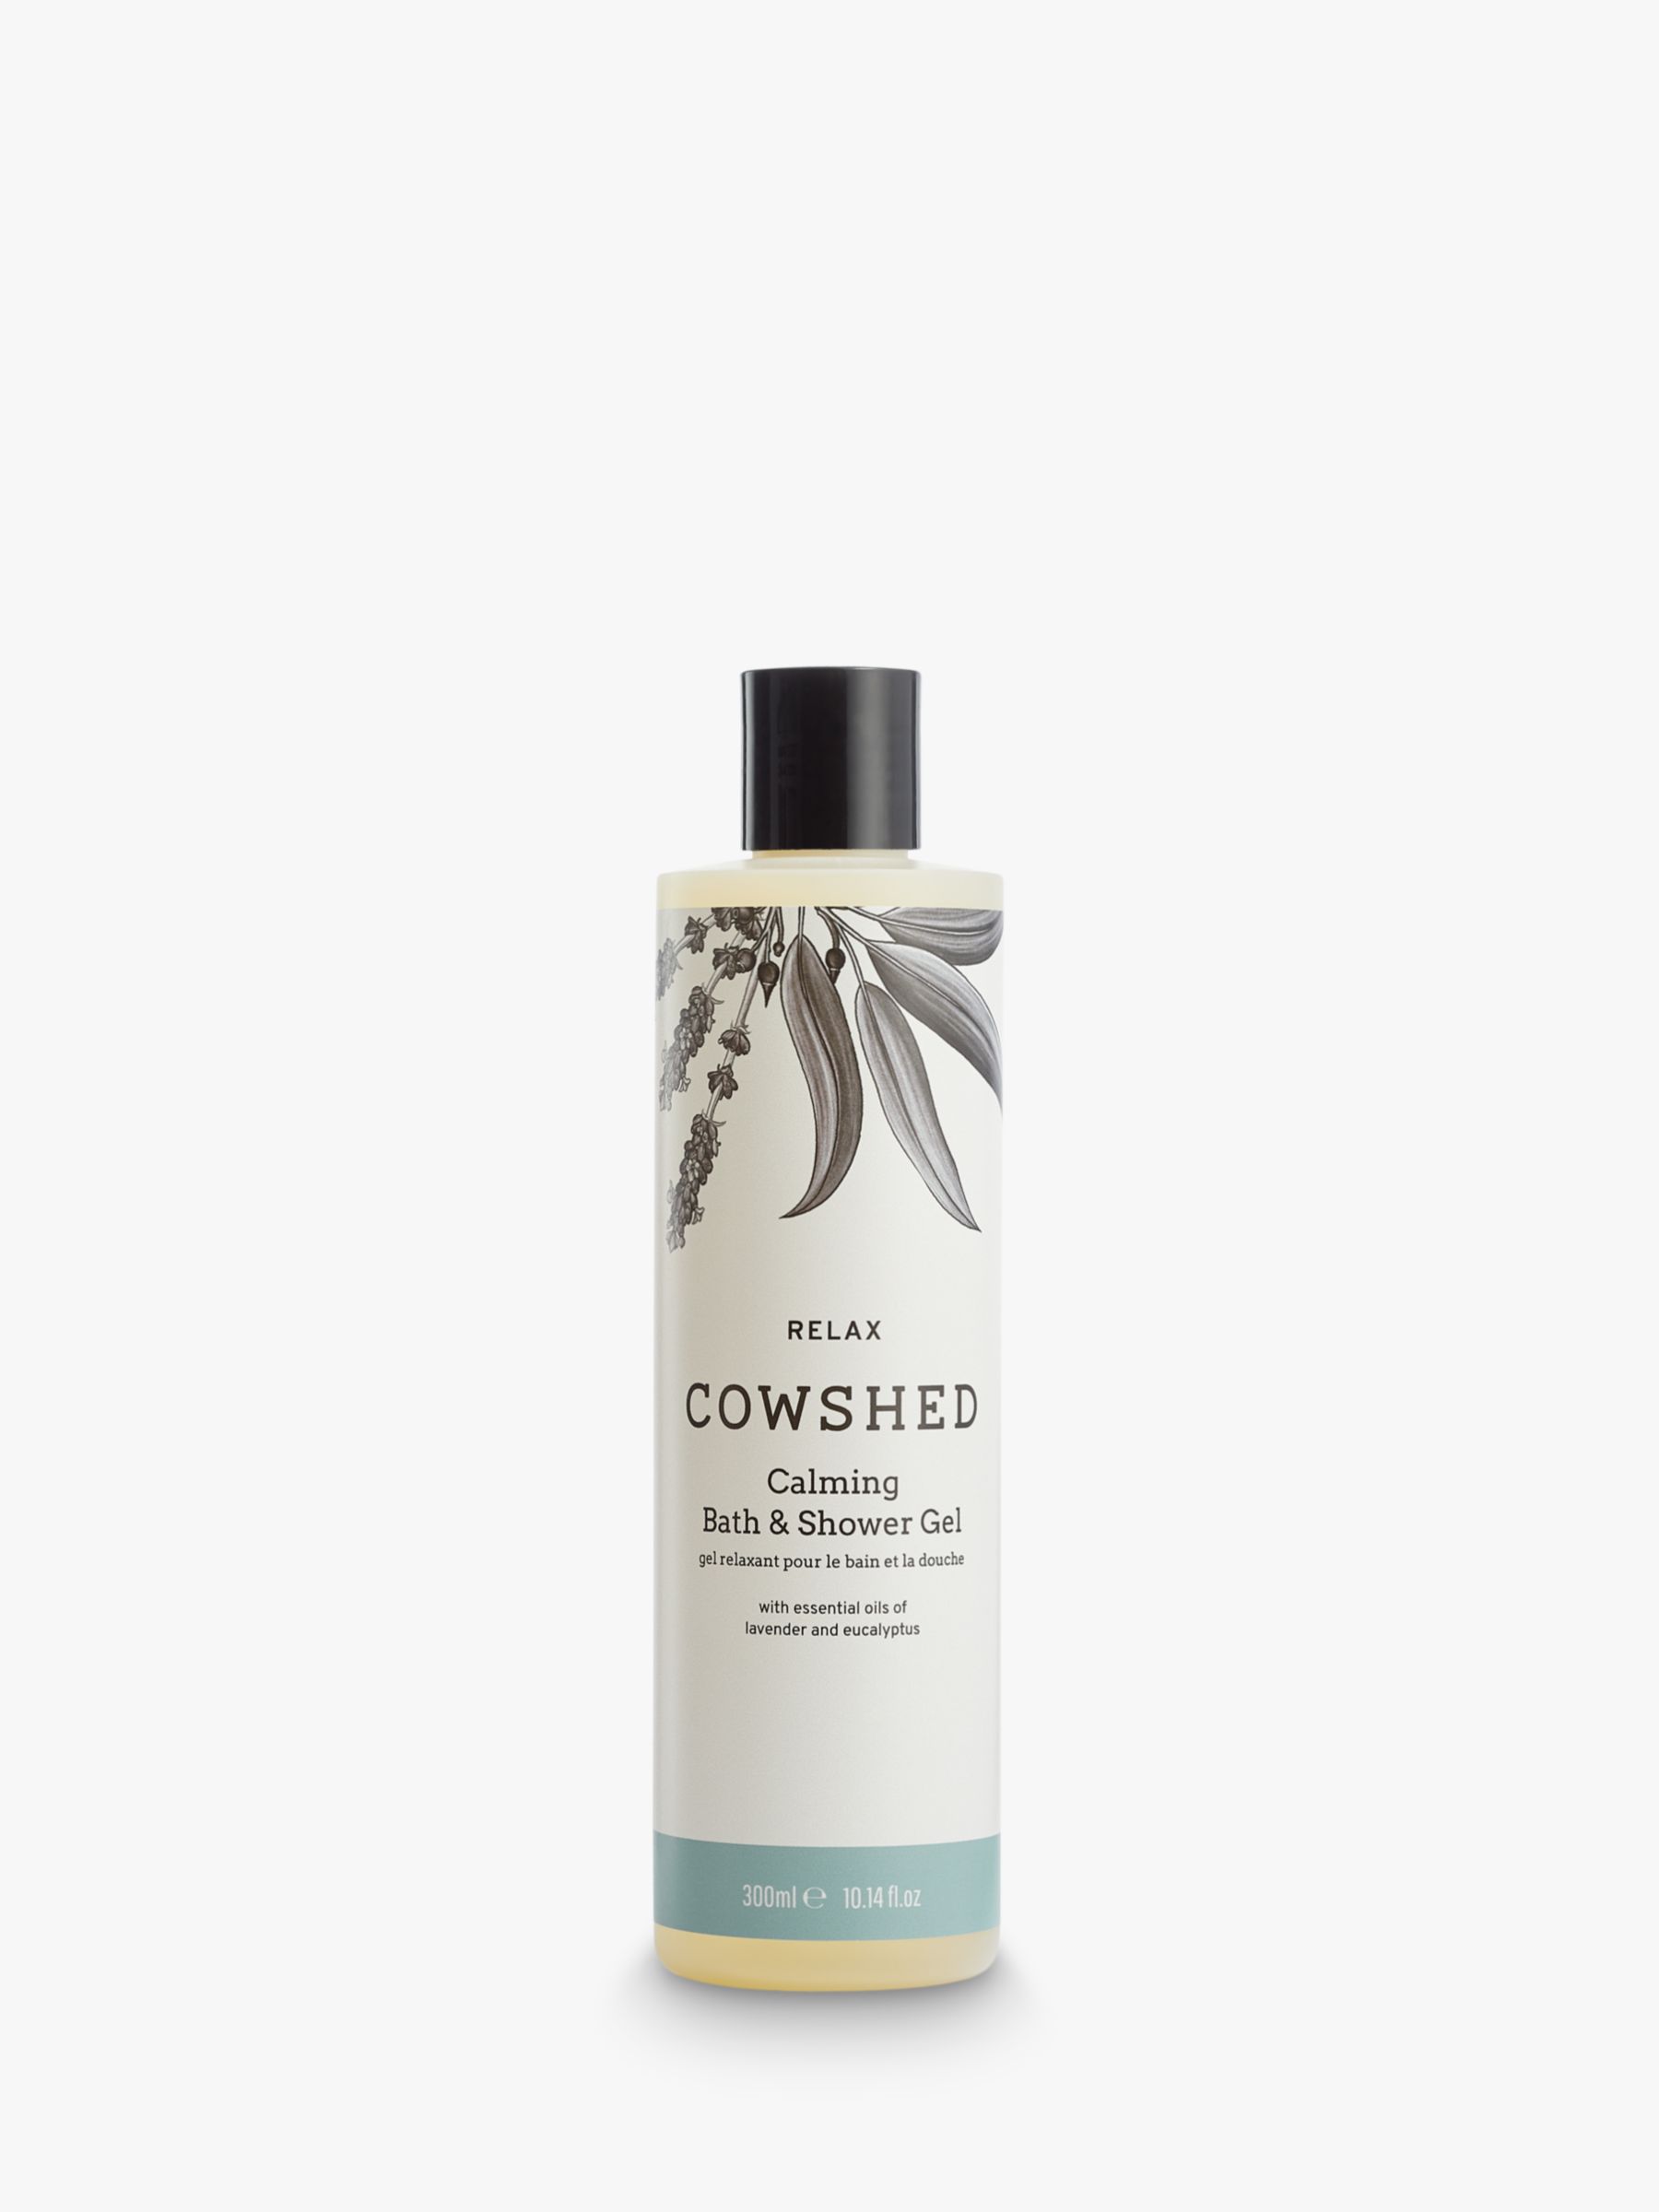 Cowshed Relax Calming Bath & Shower Gel, 300ml